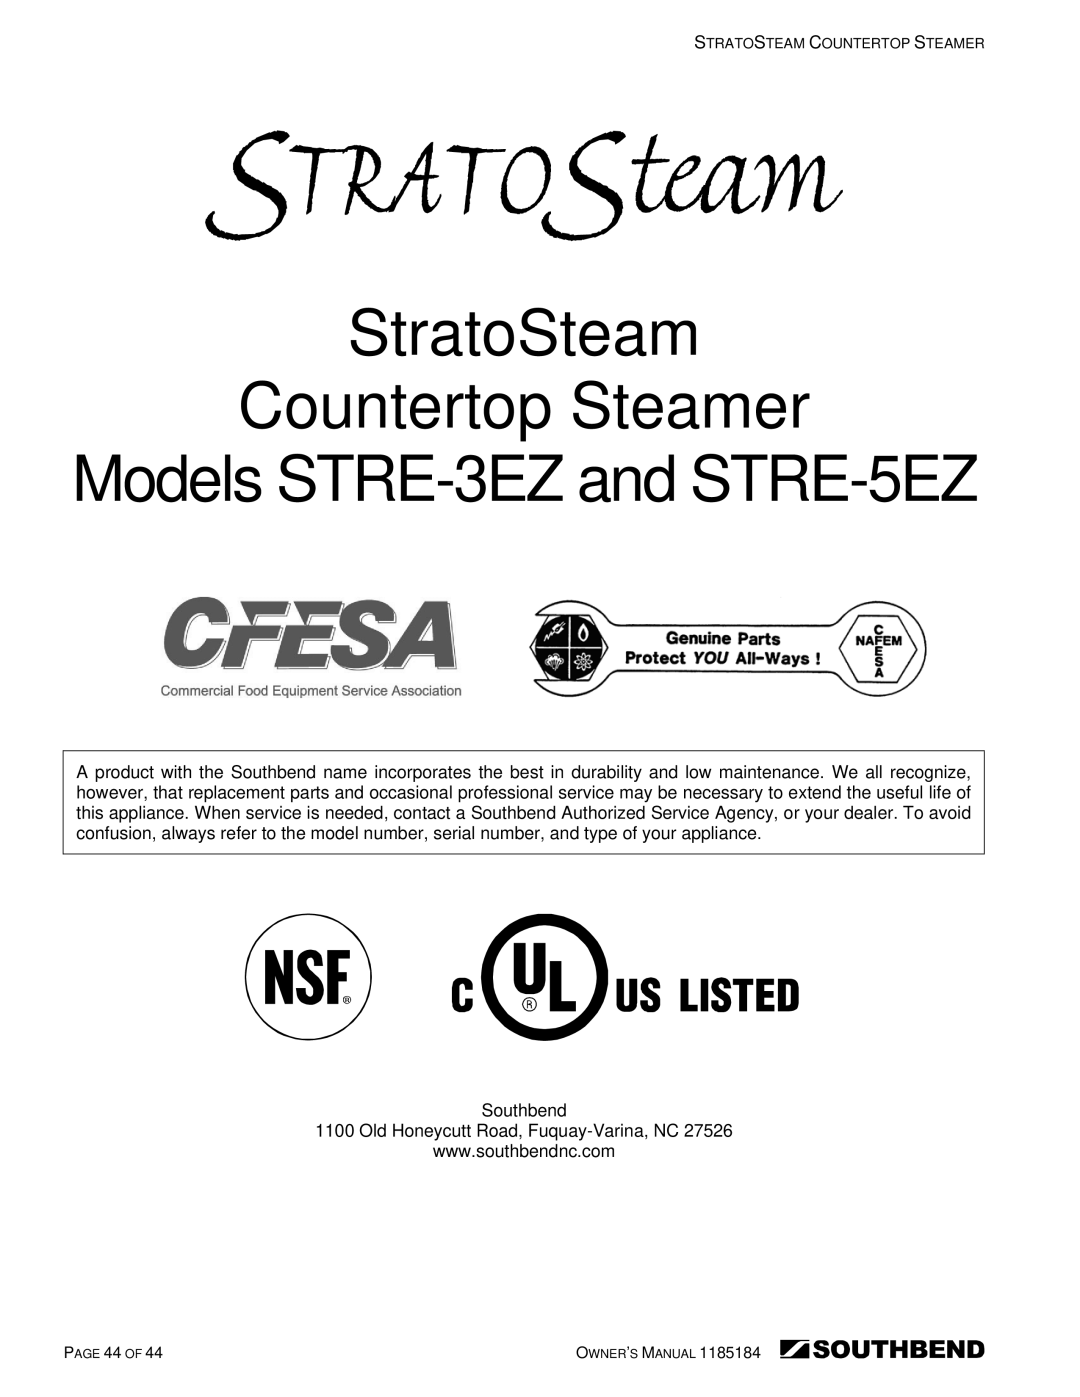 Southbend owner manual StratoSteam Countertop Steamer Models STRE-3EZ and STRE-5EZ 